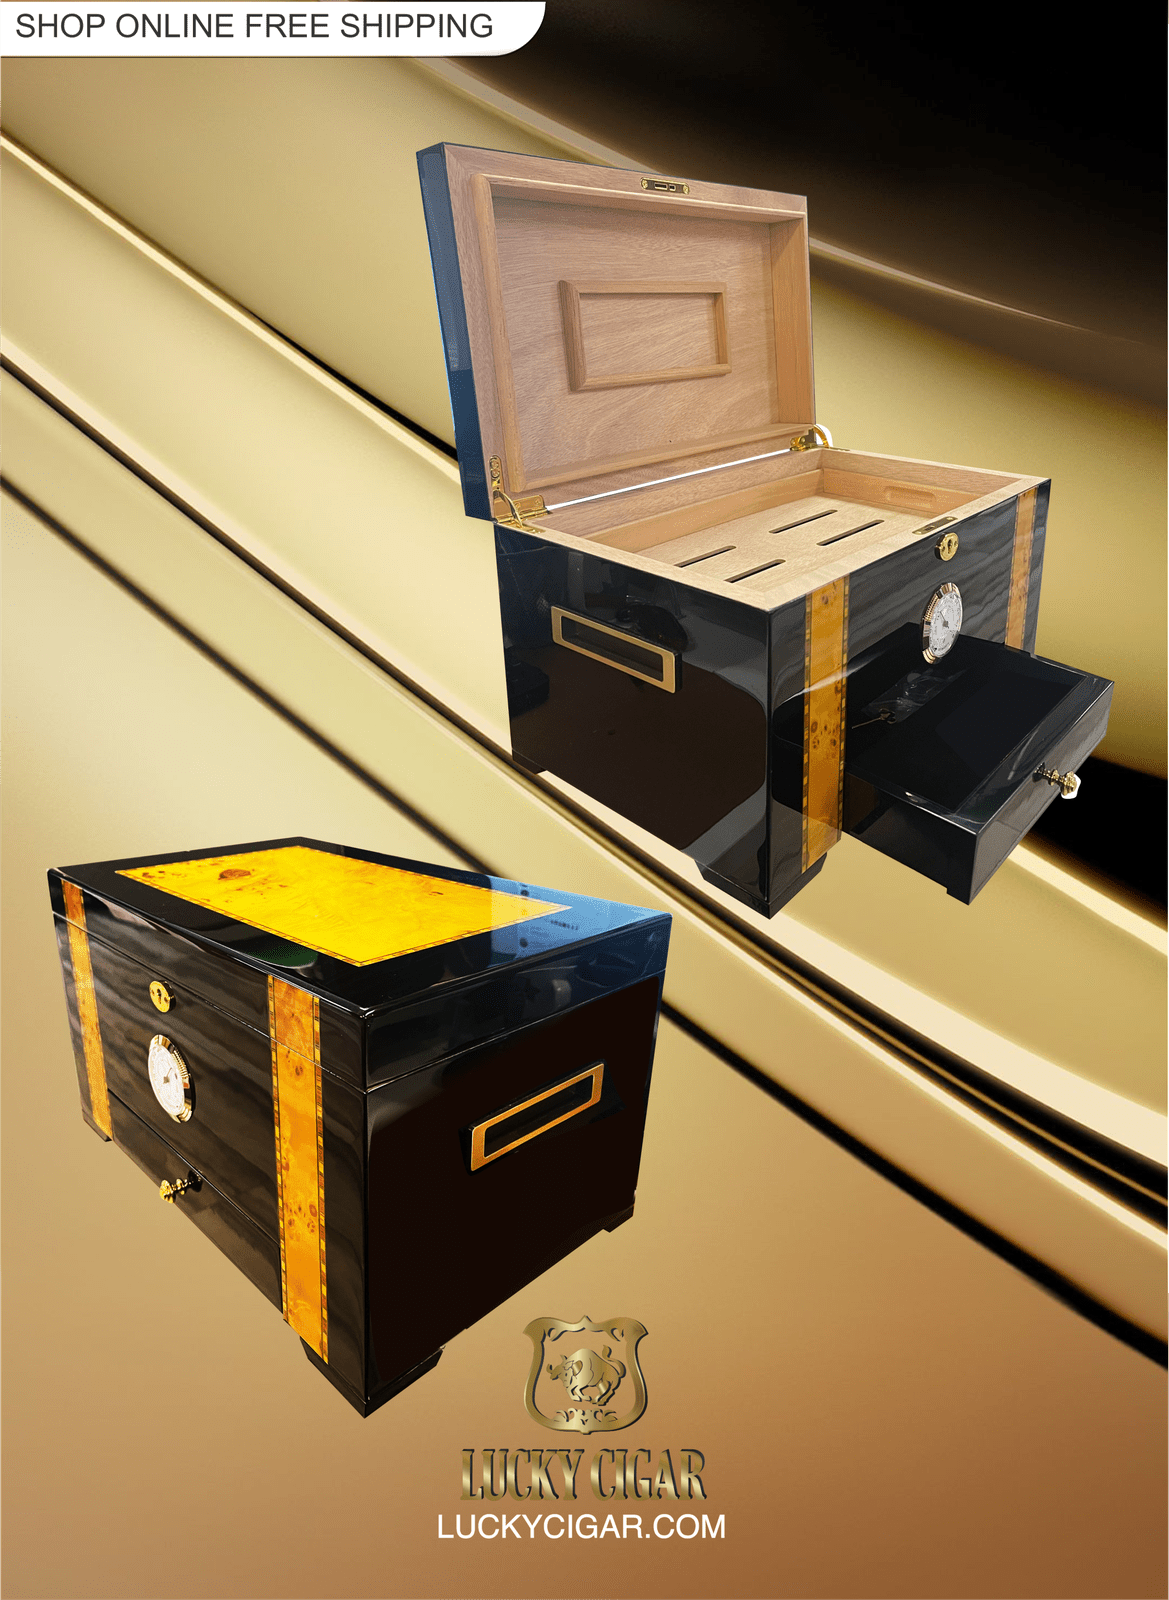 Cigar Lifestyle Accessories: Humidor For 150 cigars in Black/Gold